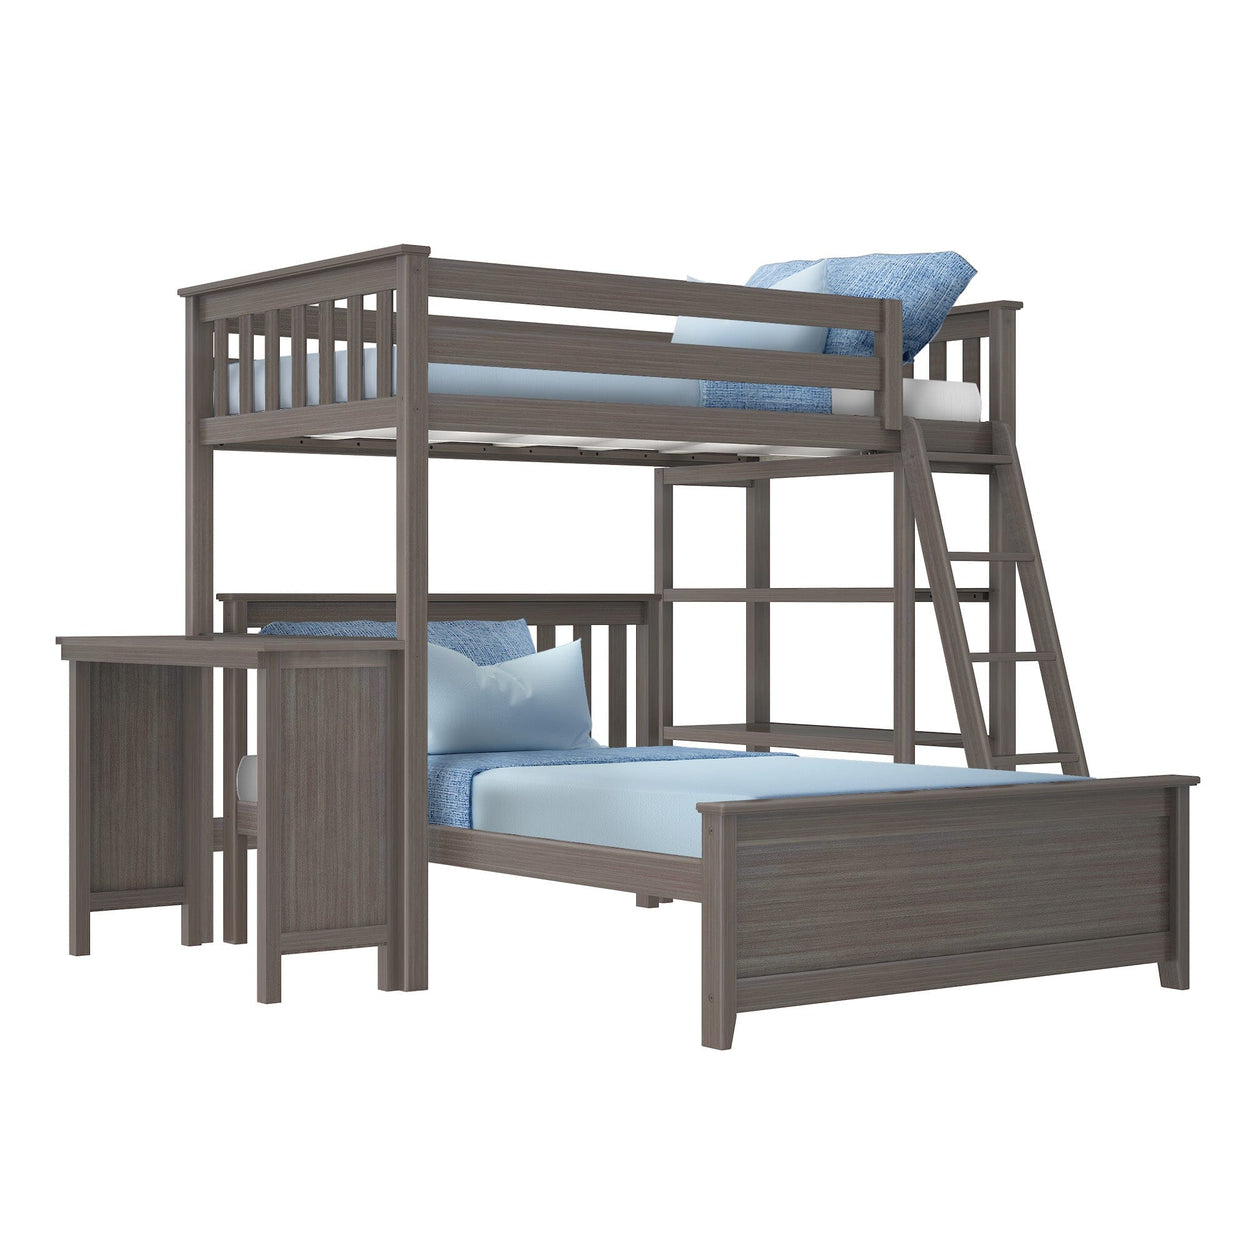 18-902-151 : Bunk Beds L-Shaped Twin over Full Bunk Bed with Bookcase and Desk, Clay